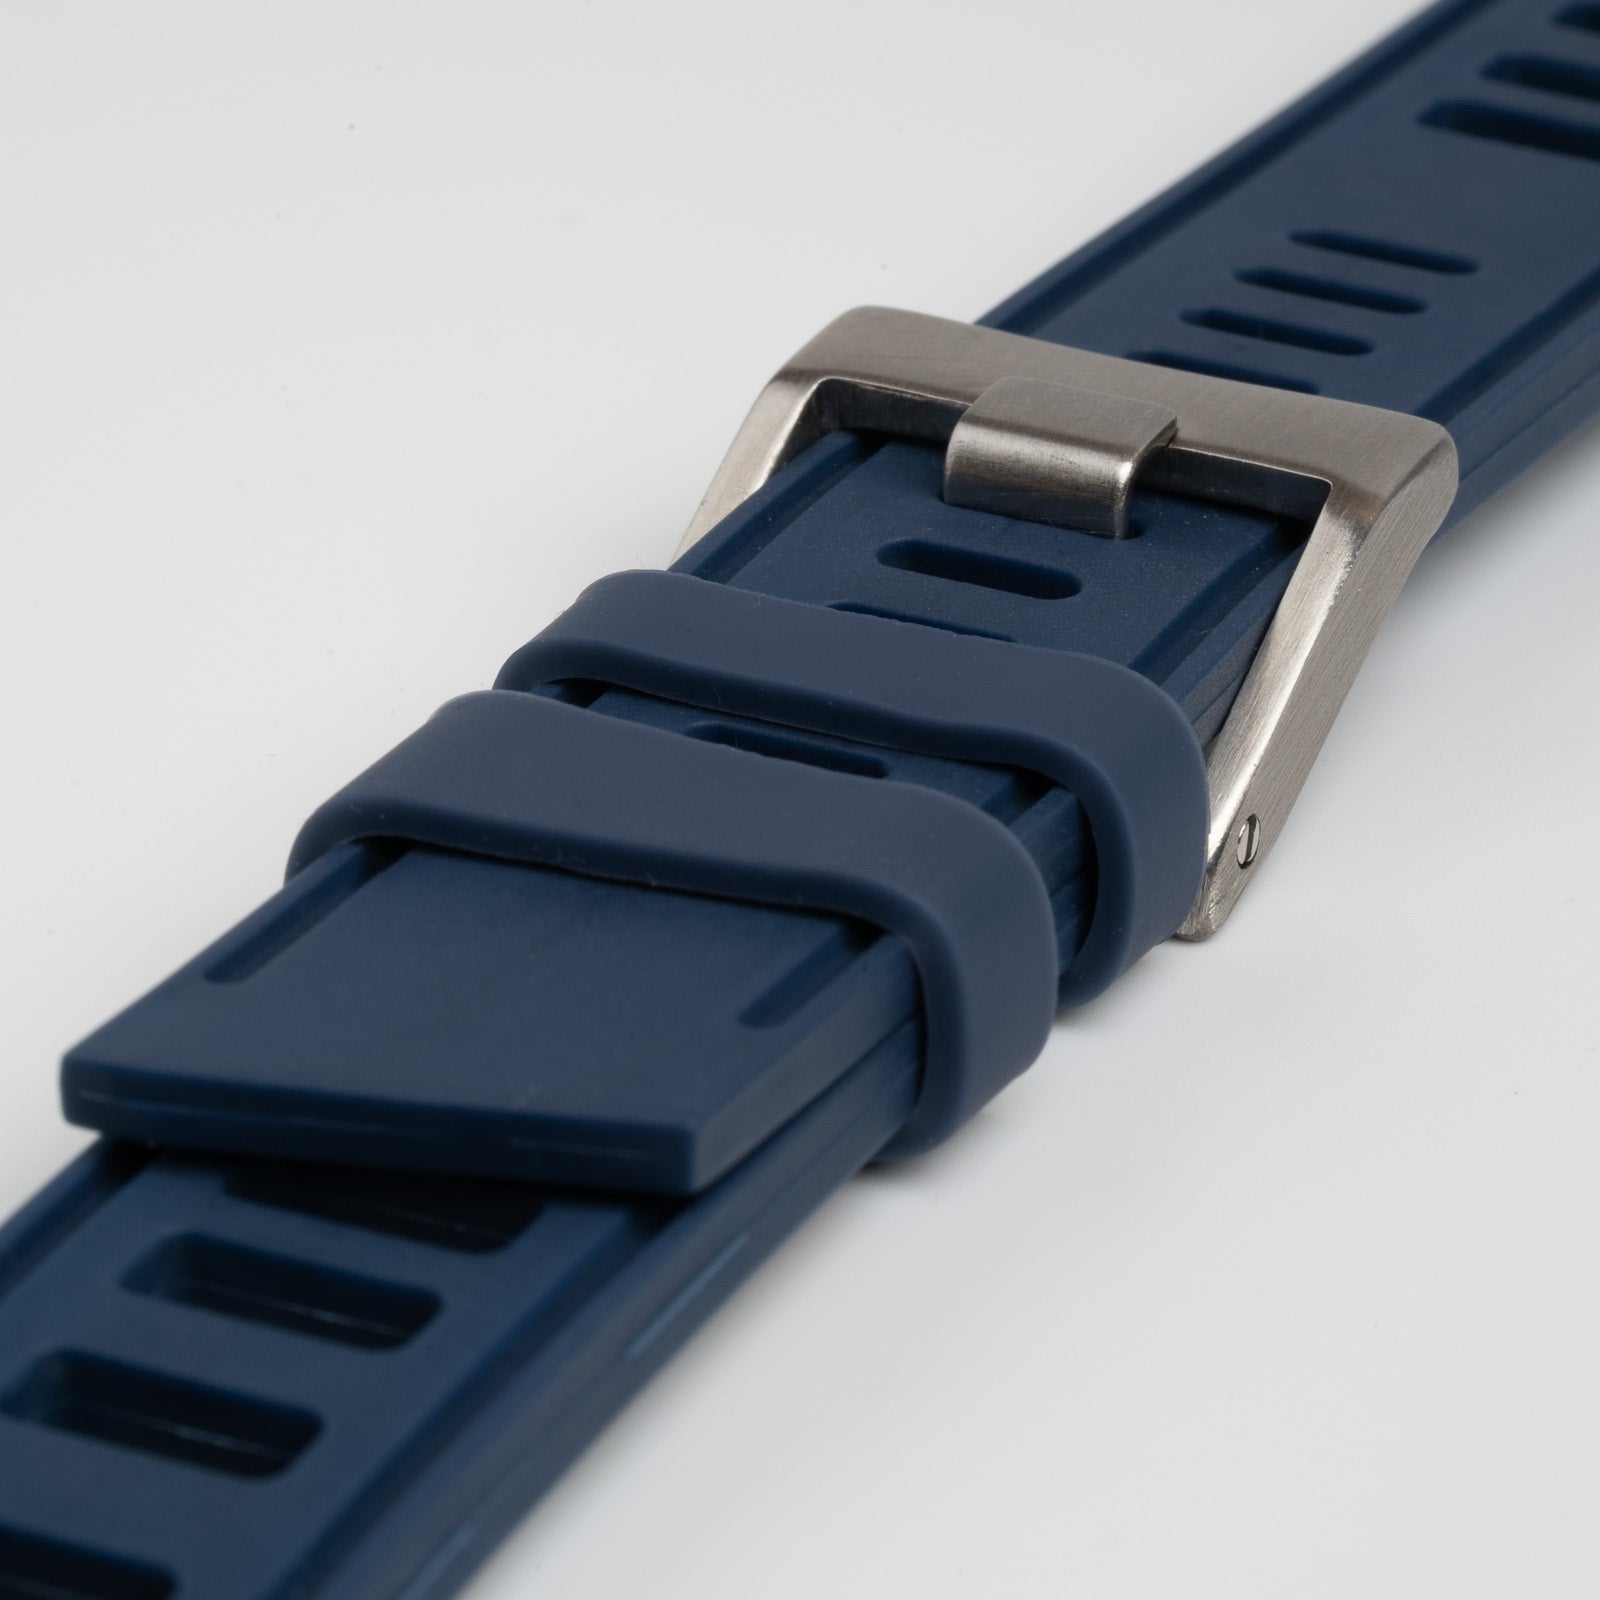 Submerge ISO Dive Navy Watch Strap